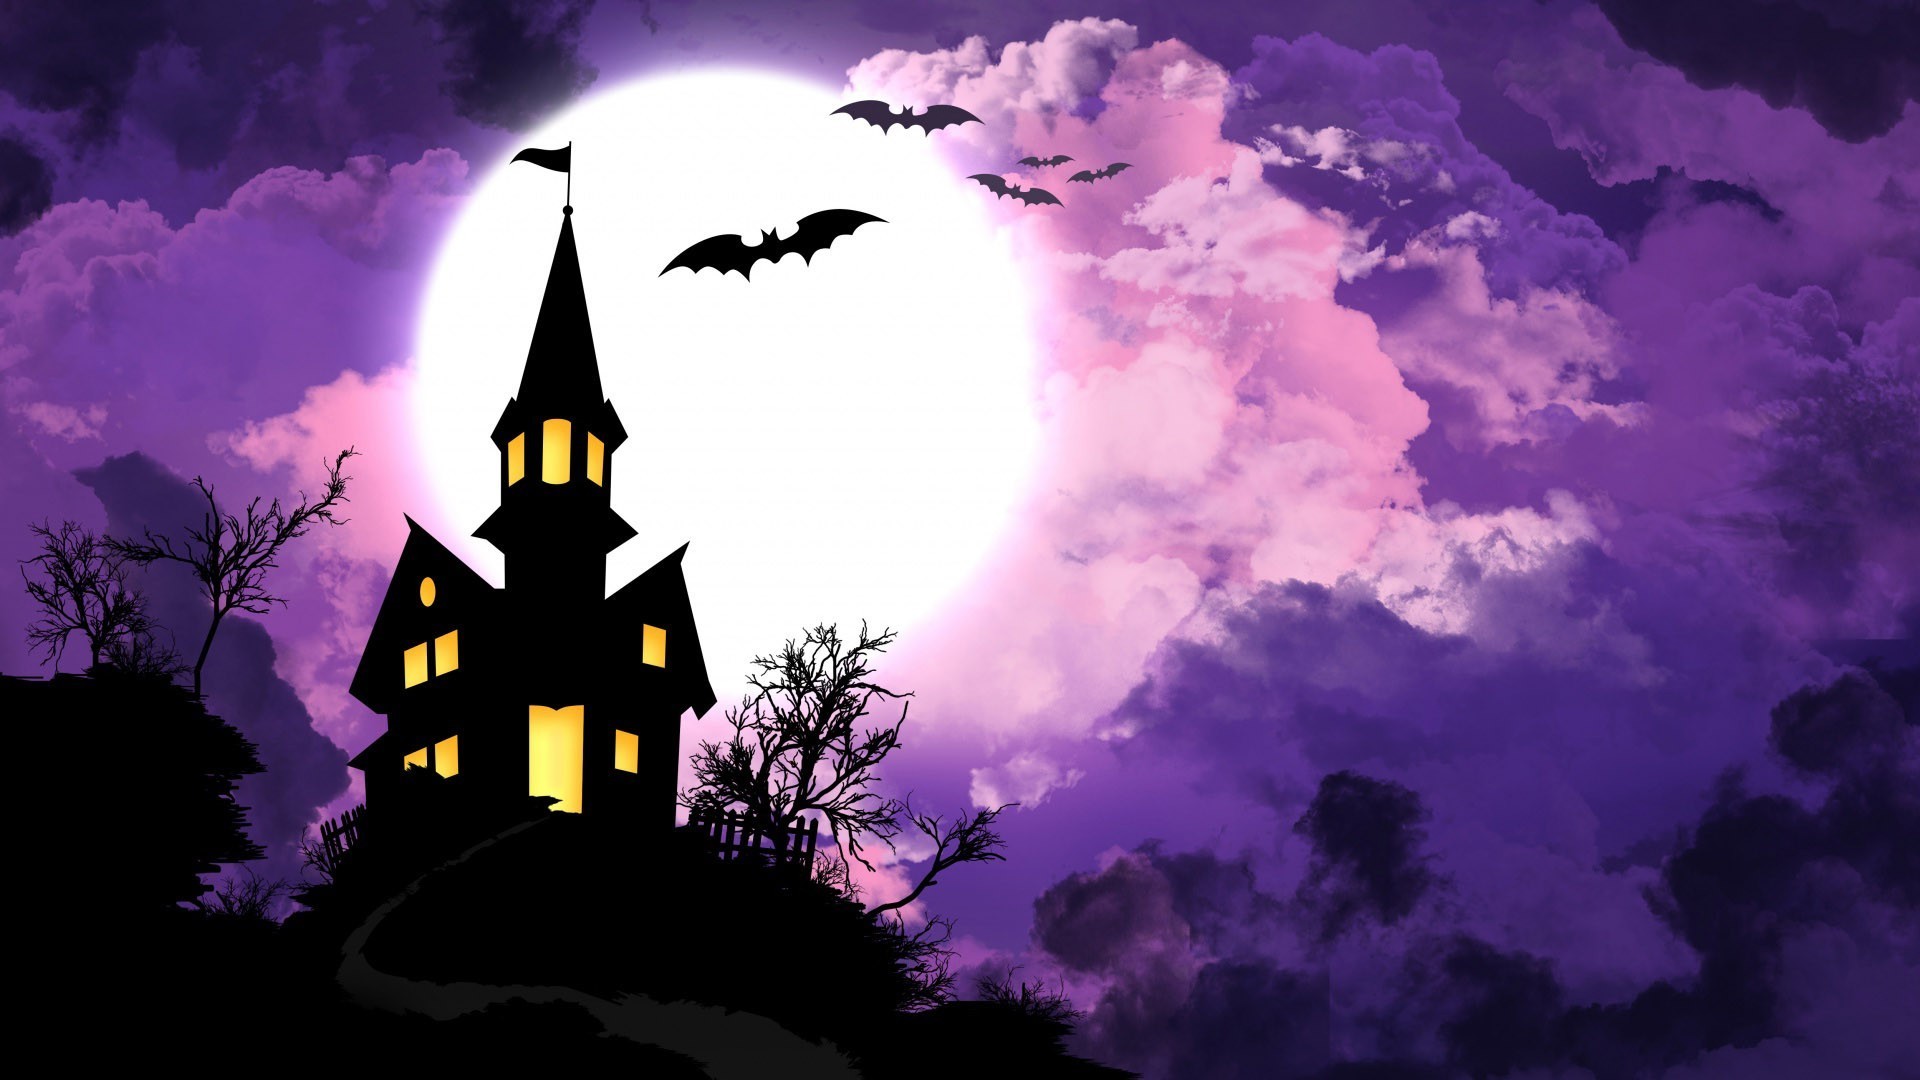 Background hd halloween theme Pictures images halloween backgrounds wallpapers